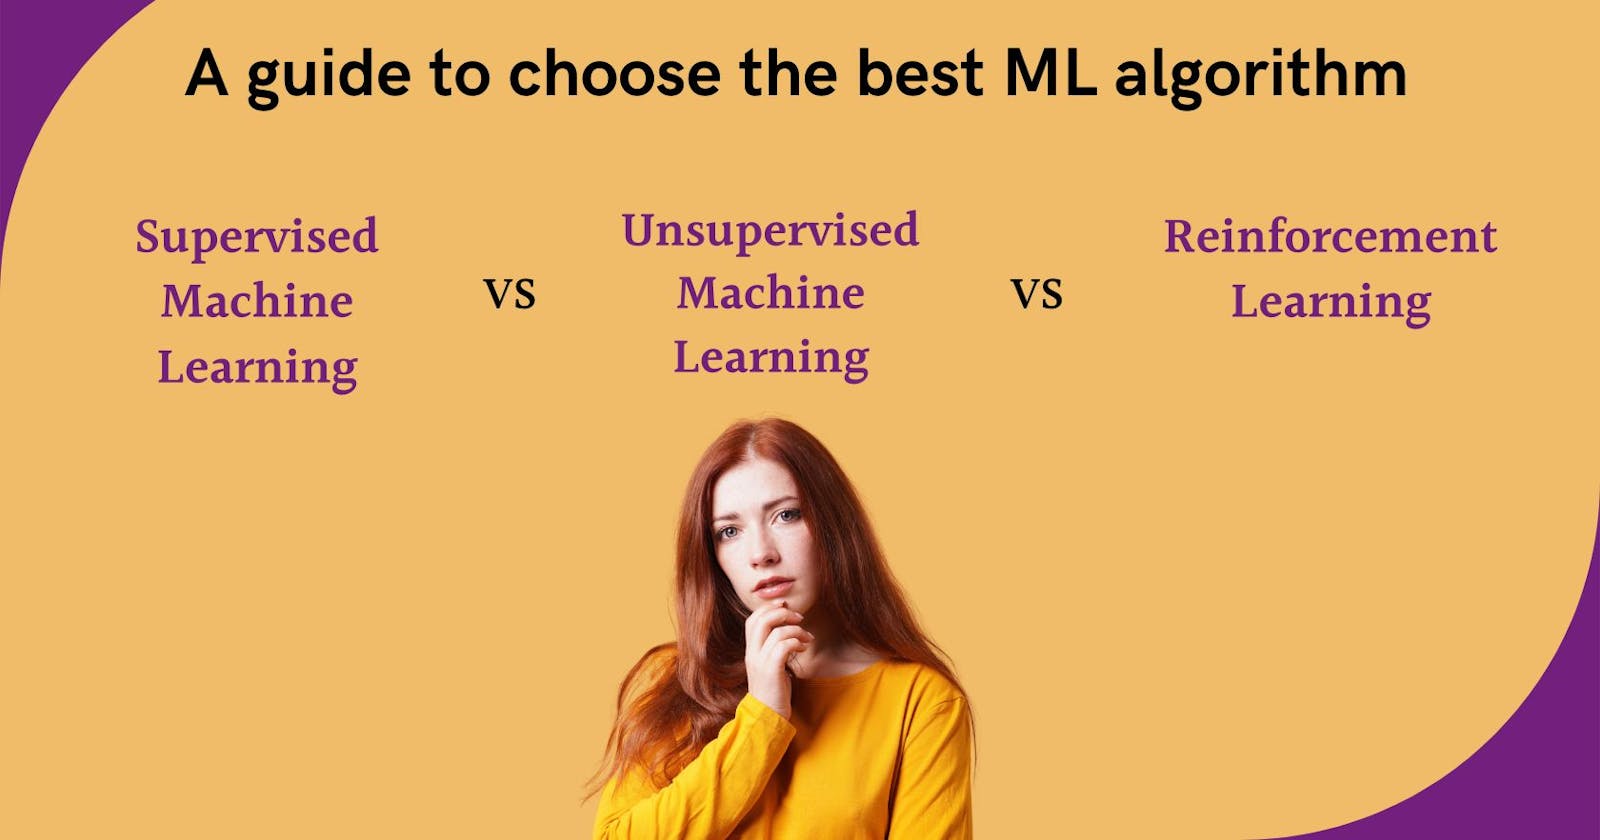 A comparison of different machine learning algorithms and when to use each one